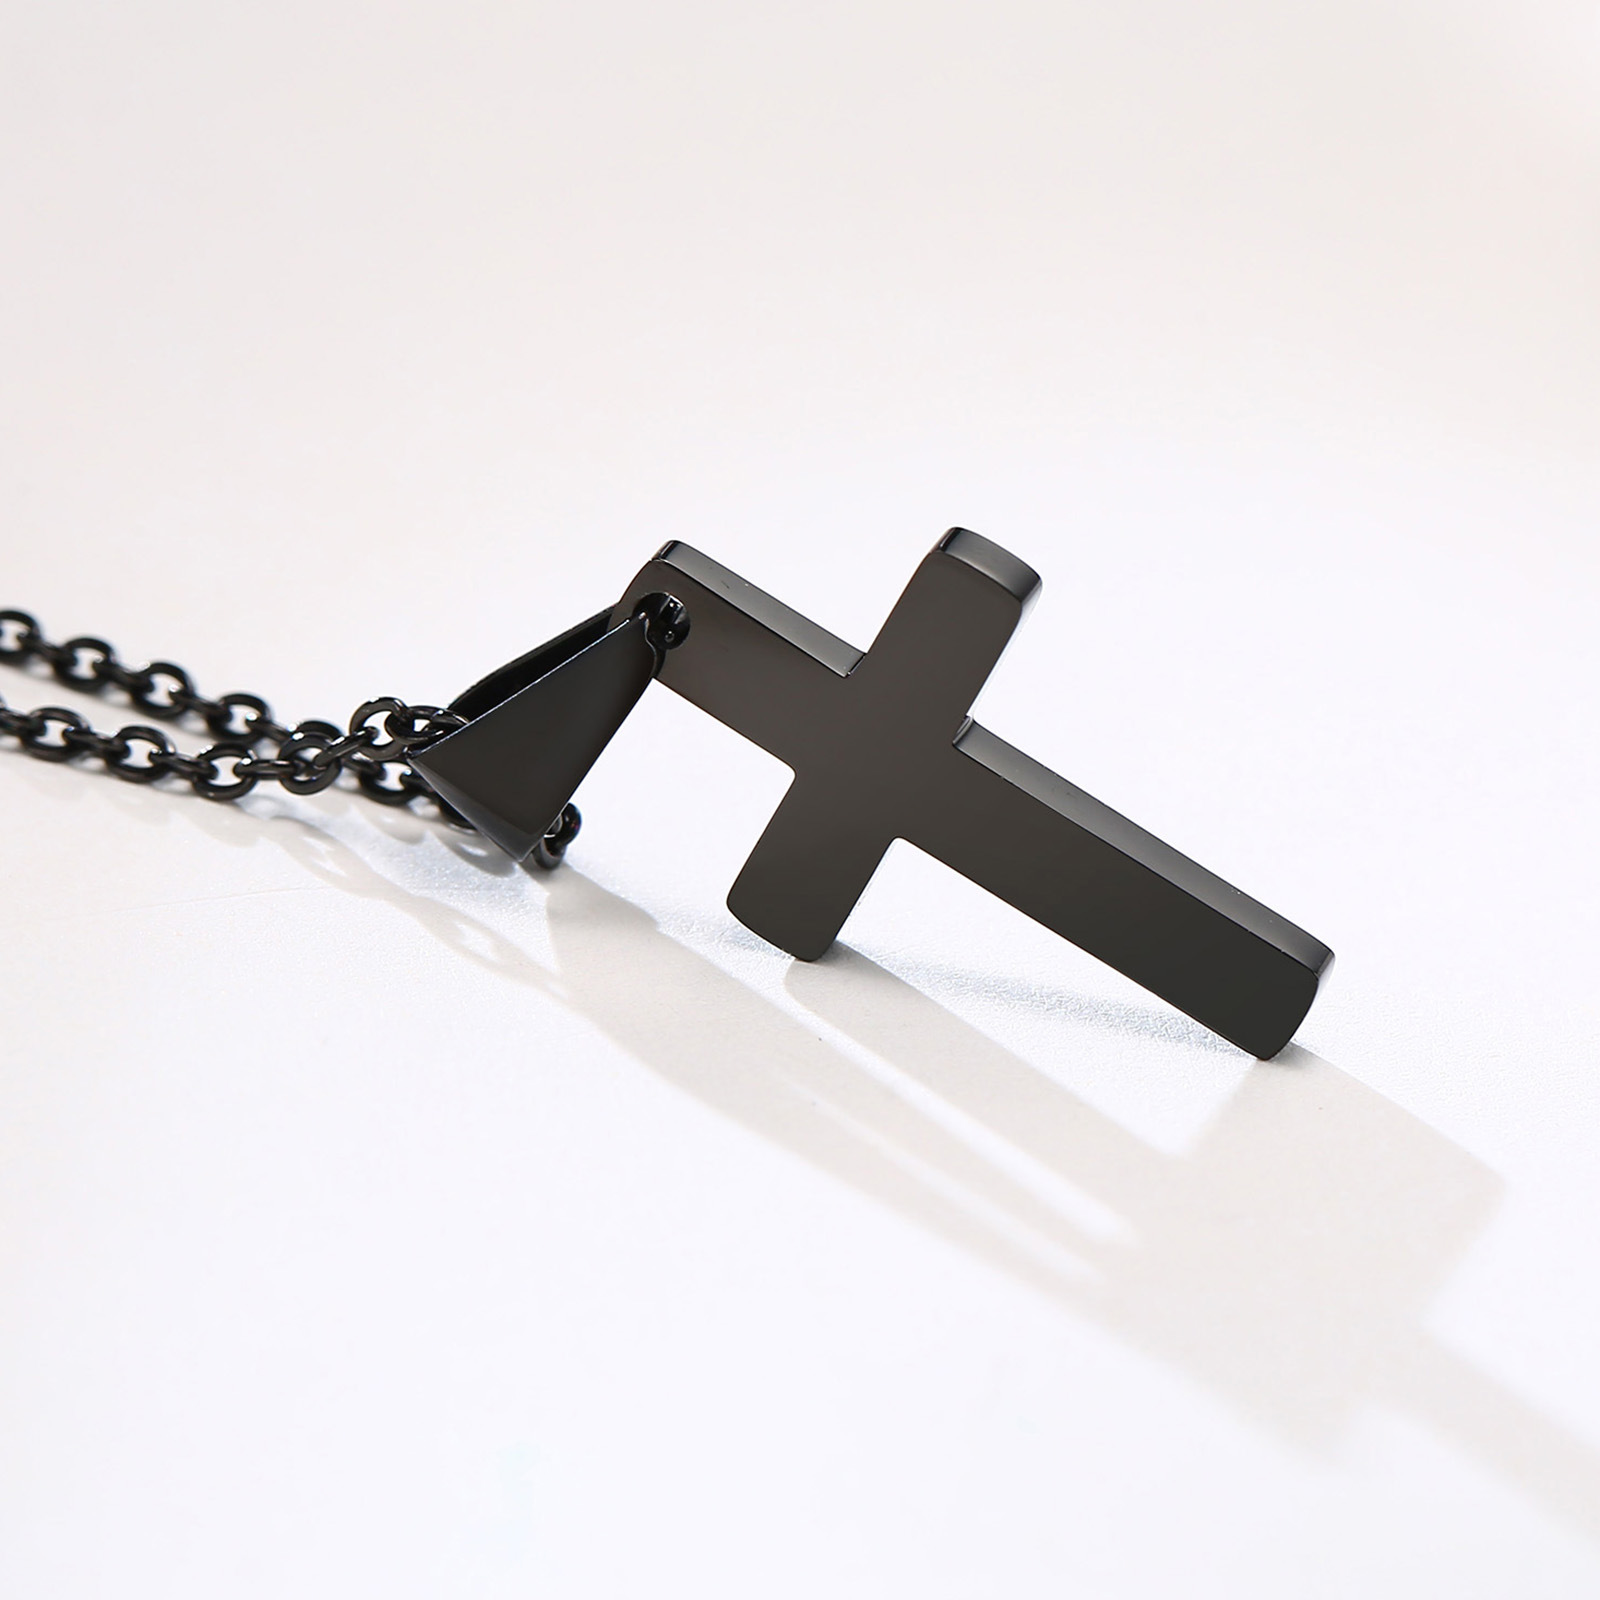 6:Black, with chain